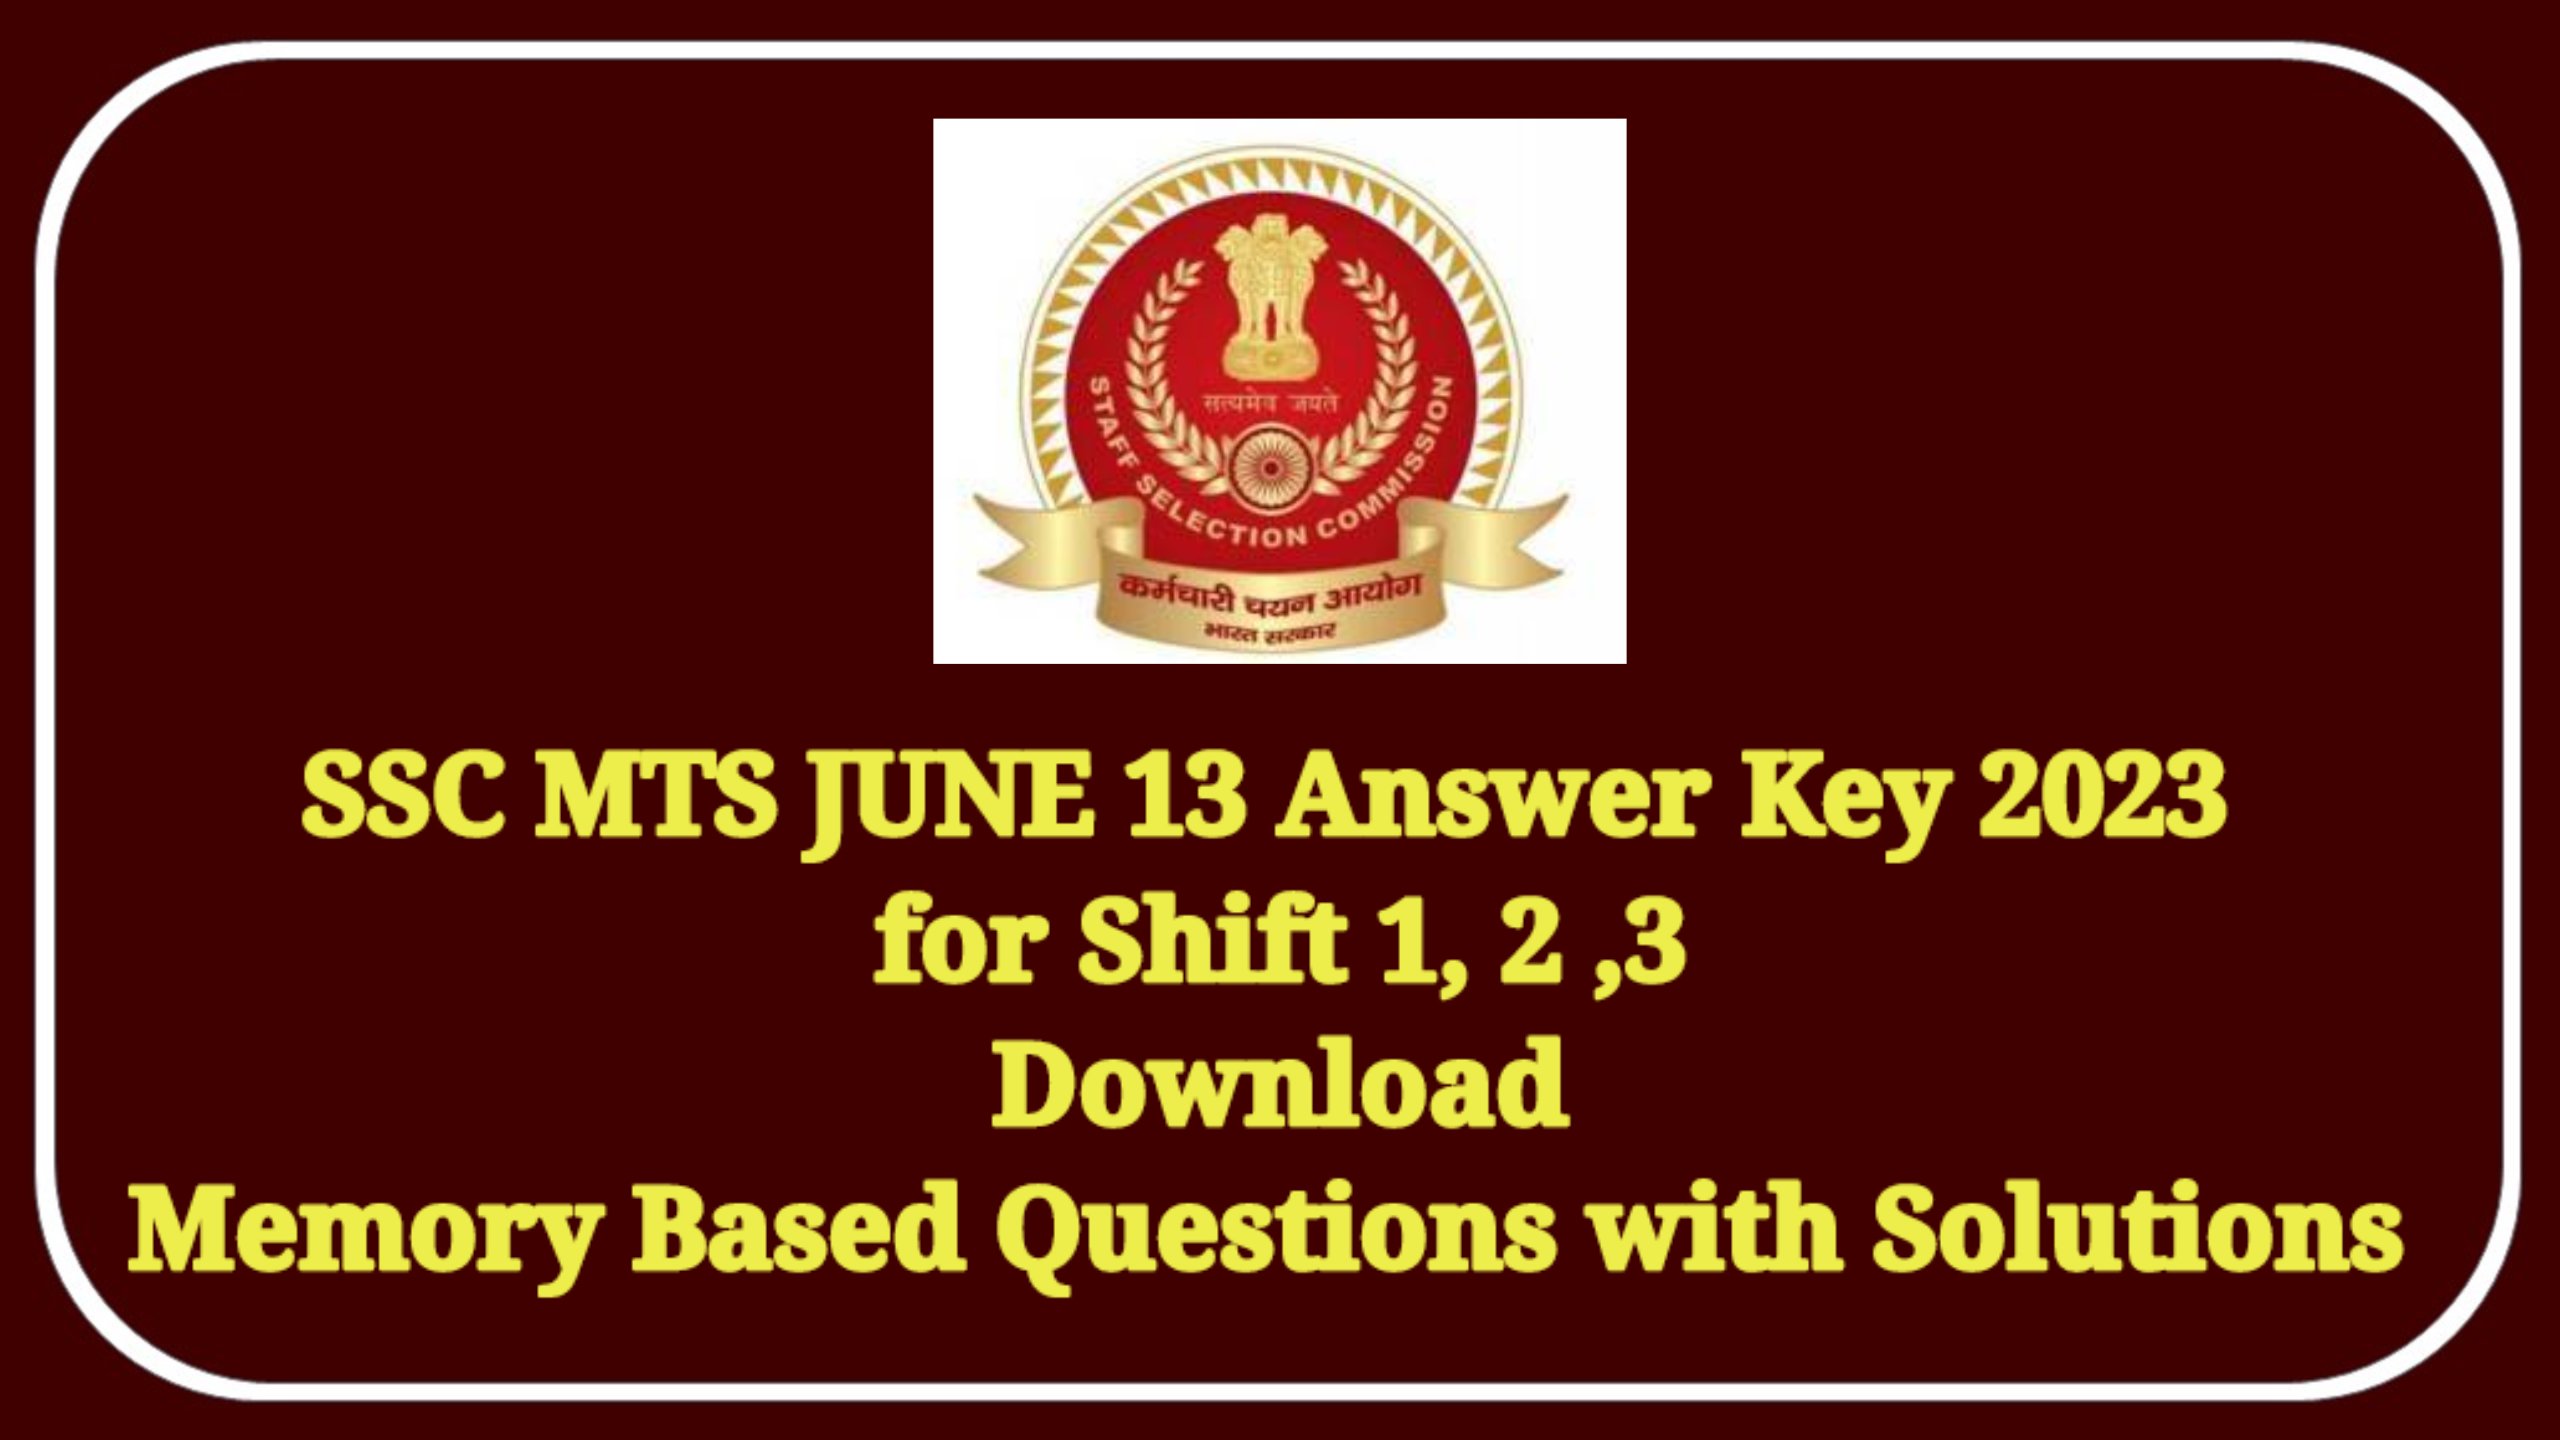 You are currently viewing SSC MTS June 13 Answer Key 2023 for Shifts 1, 2, 3: Download Memory Based Questions with Solutions